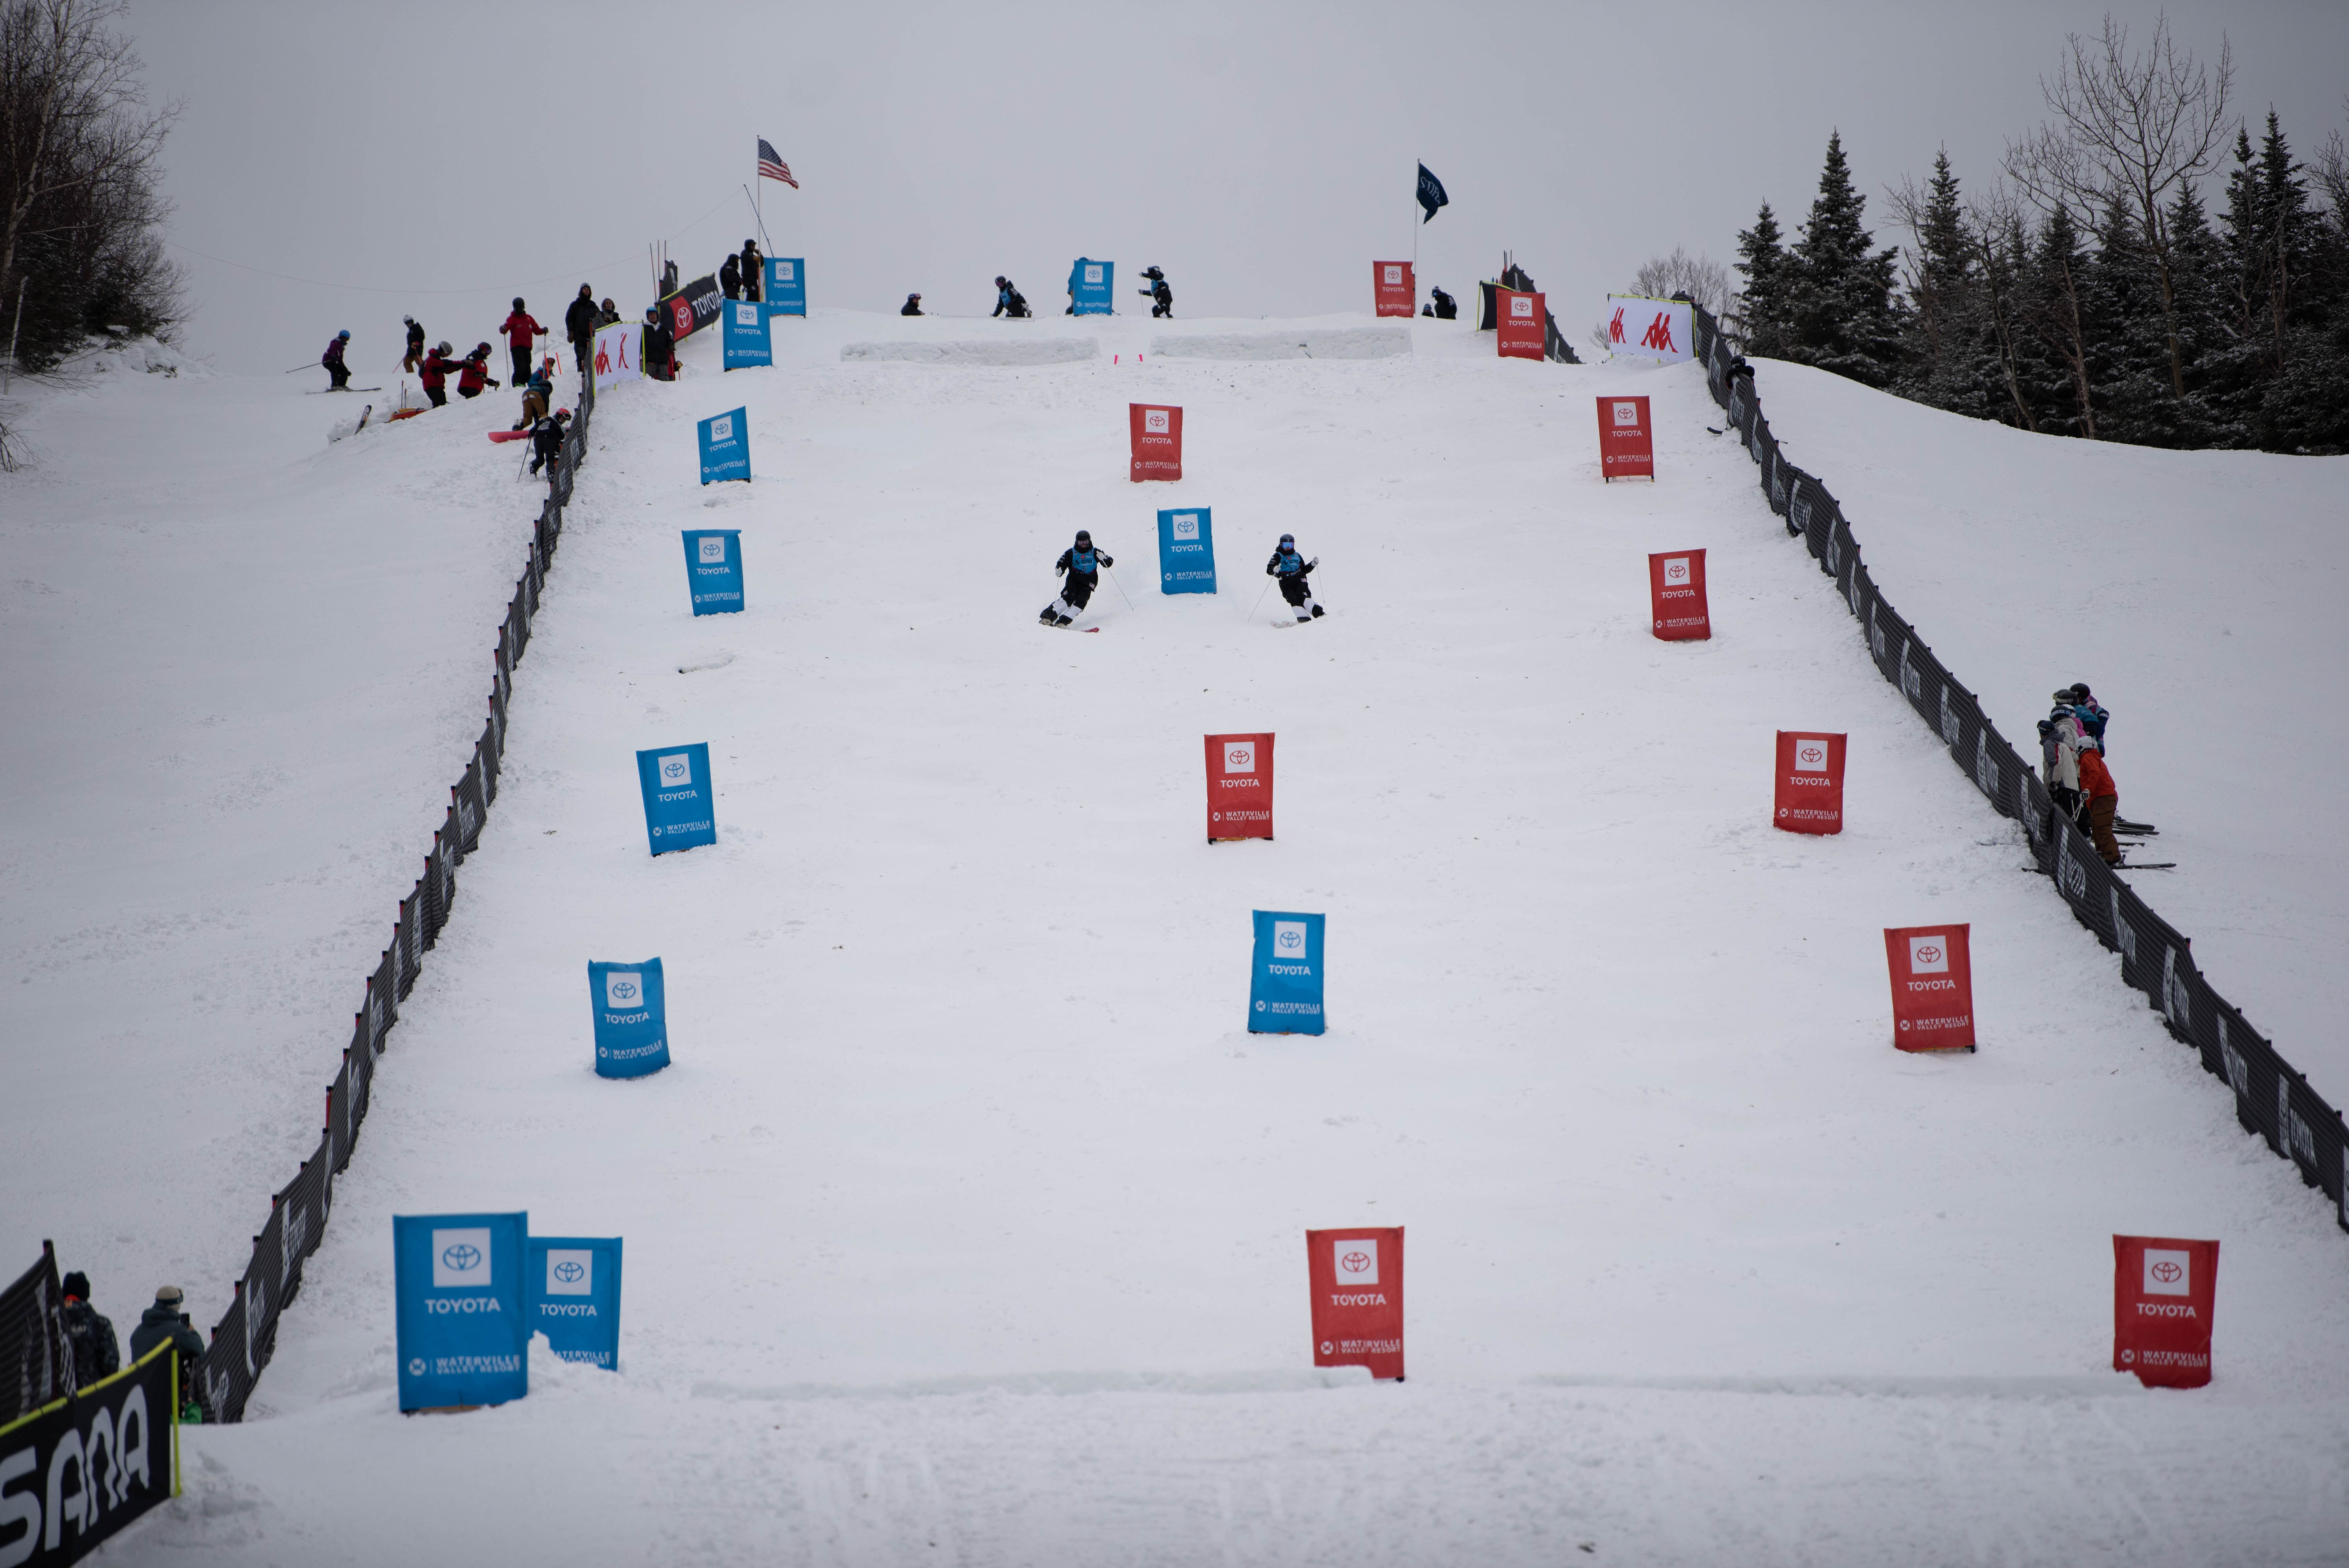 Athletes skiing on a moguls course at Waterville